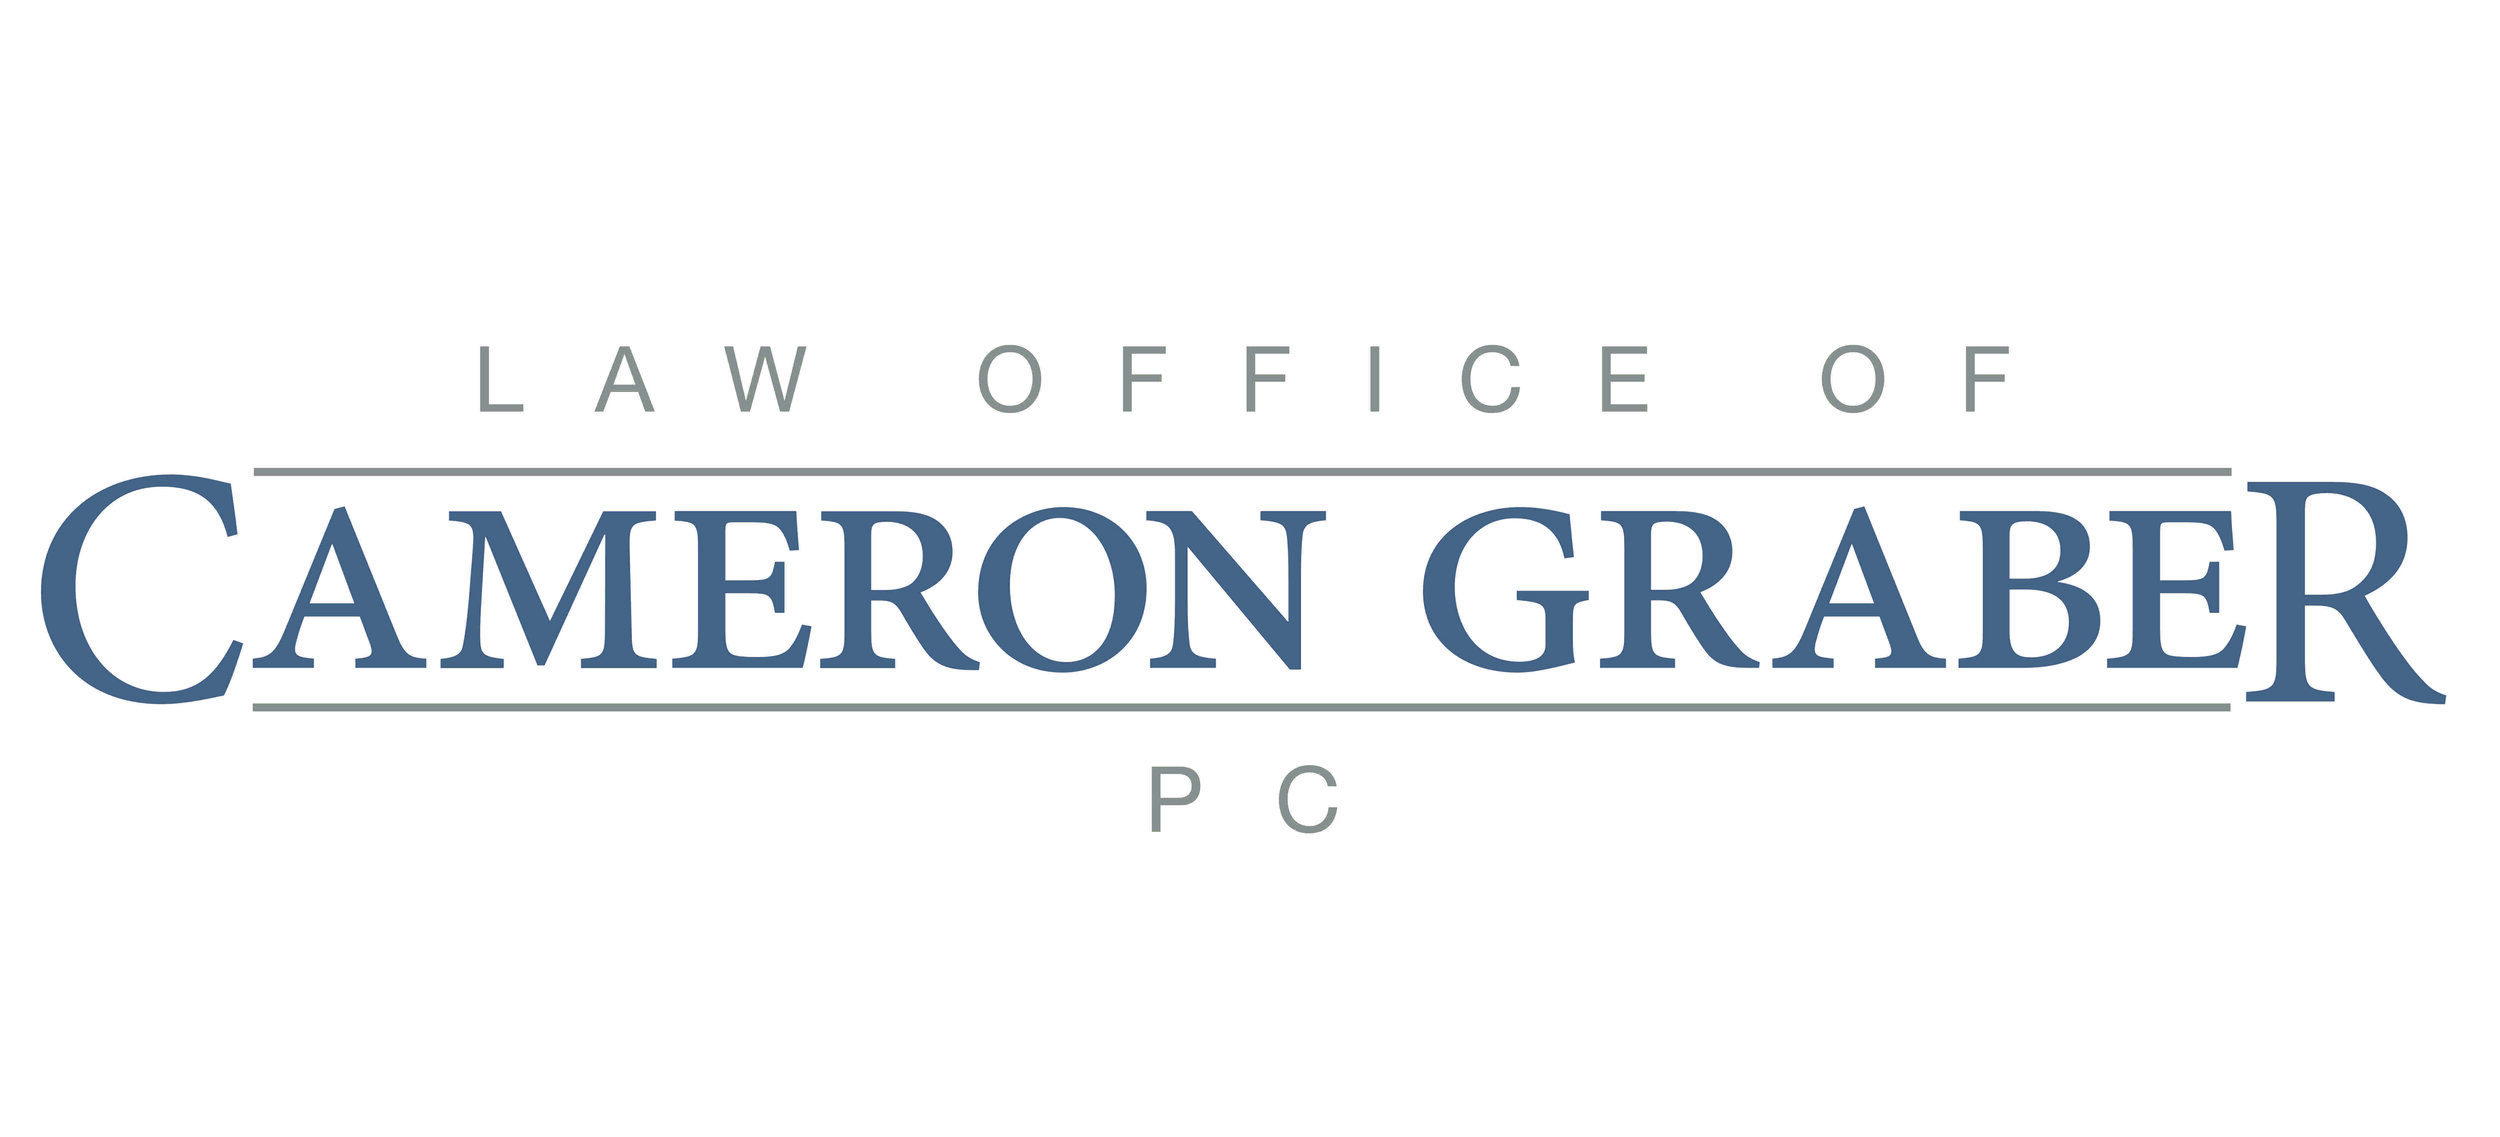 Law Office of Cameron Graber, PC